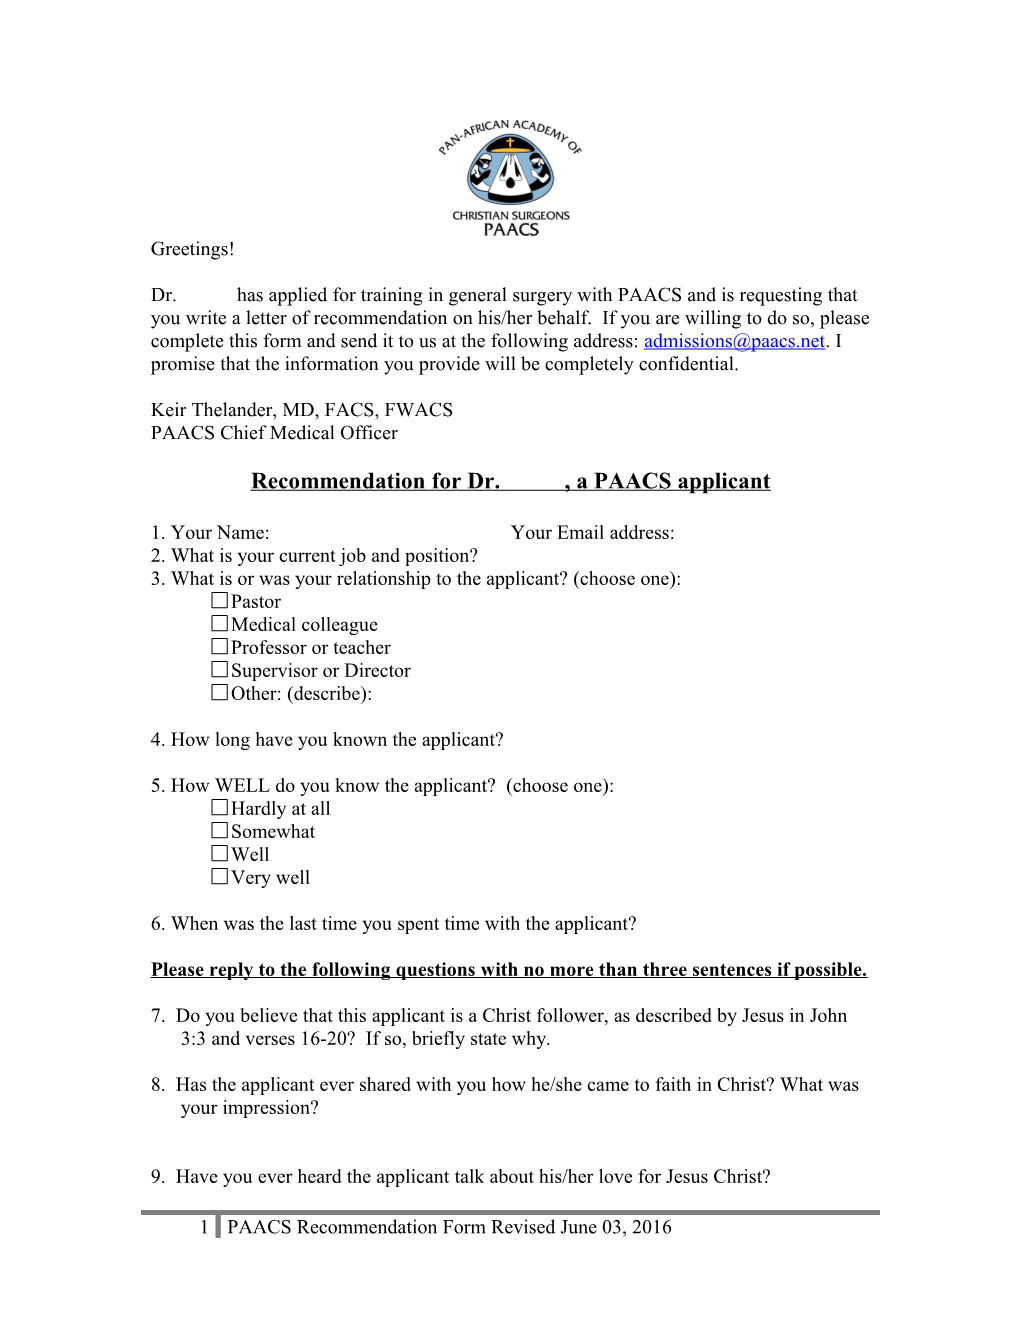 Recommendation Fordr. , a PAACS Applicant